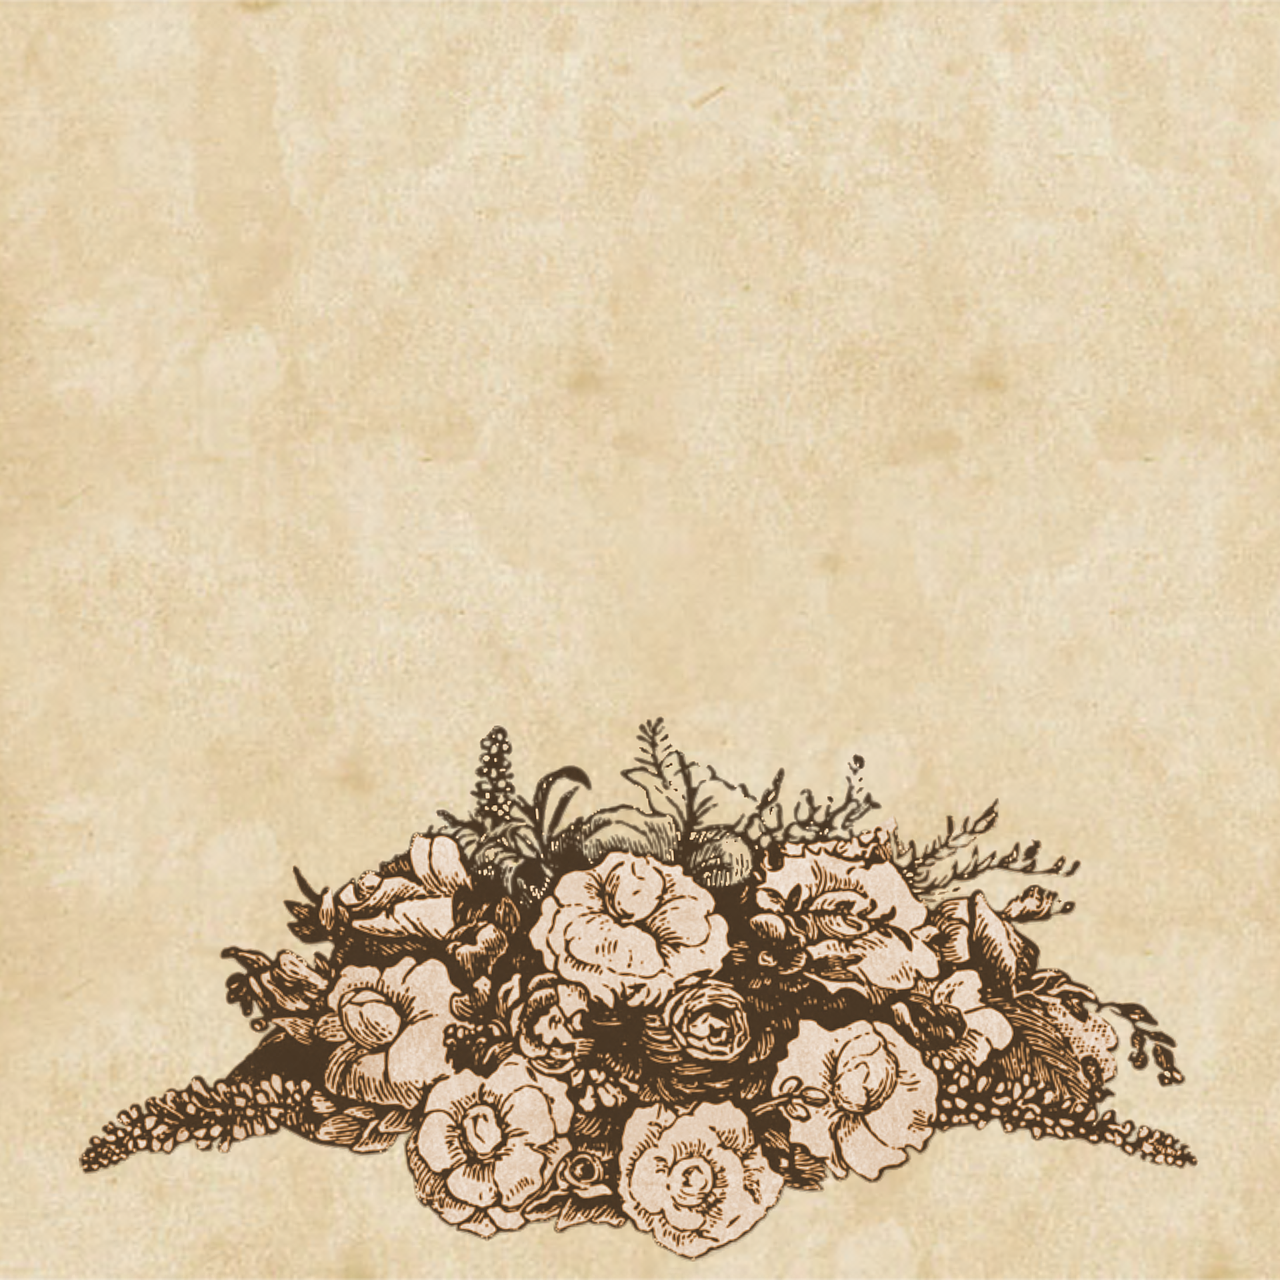 Background,drawing,vintage,brown,flower - free image from 